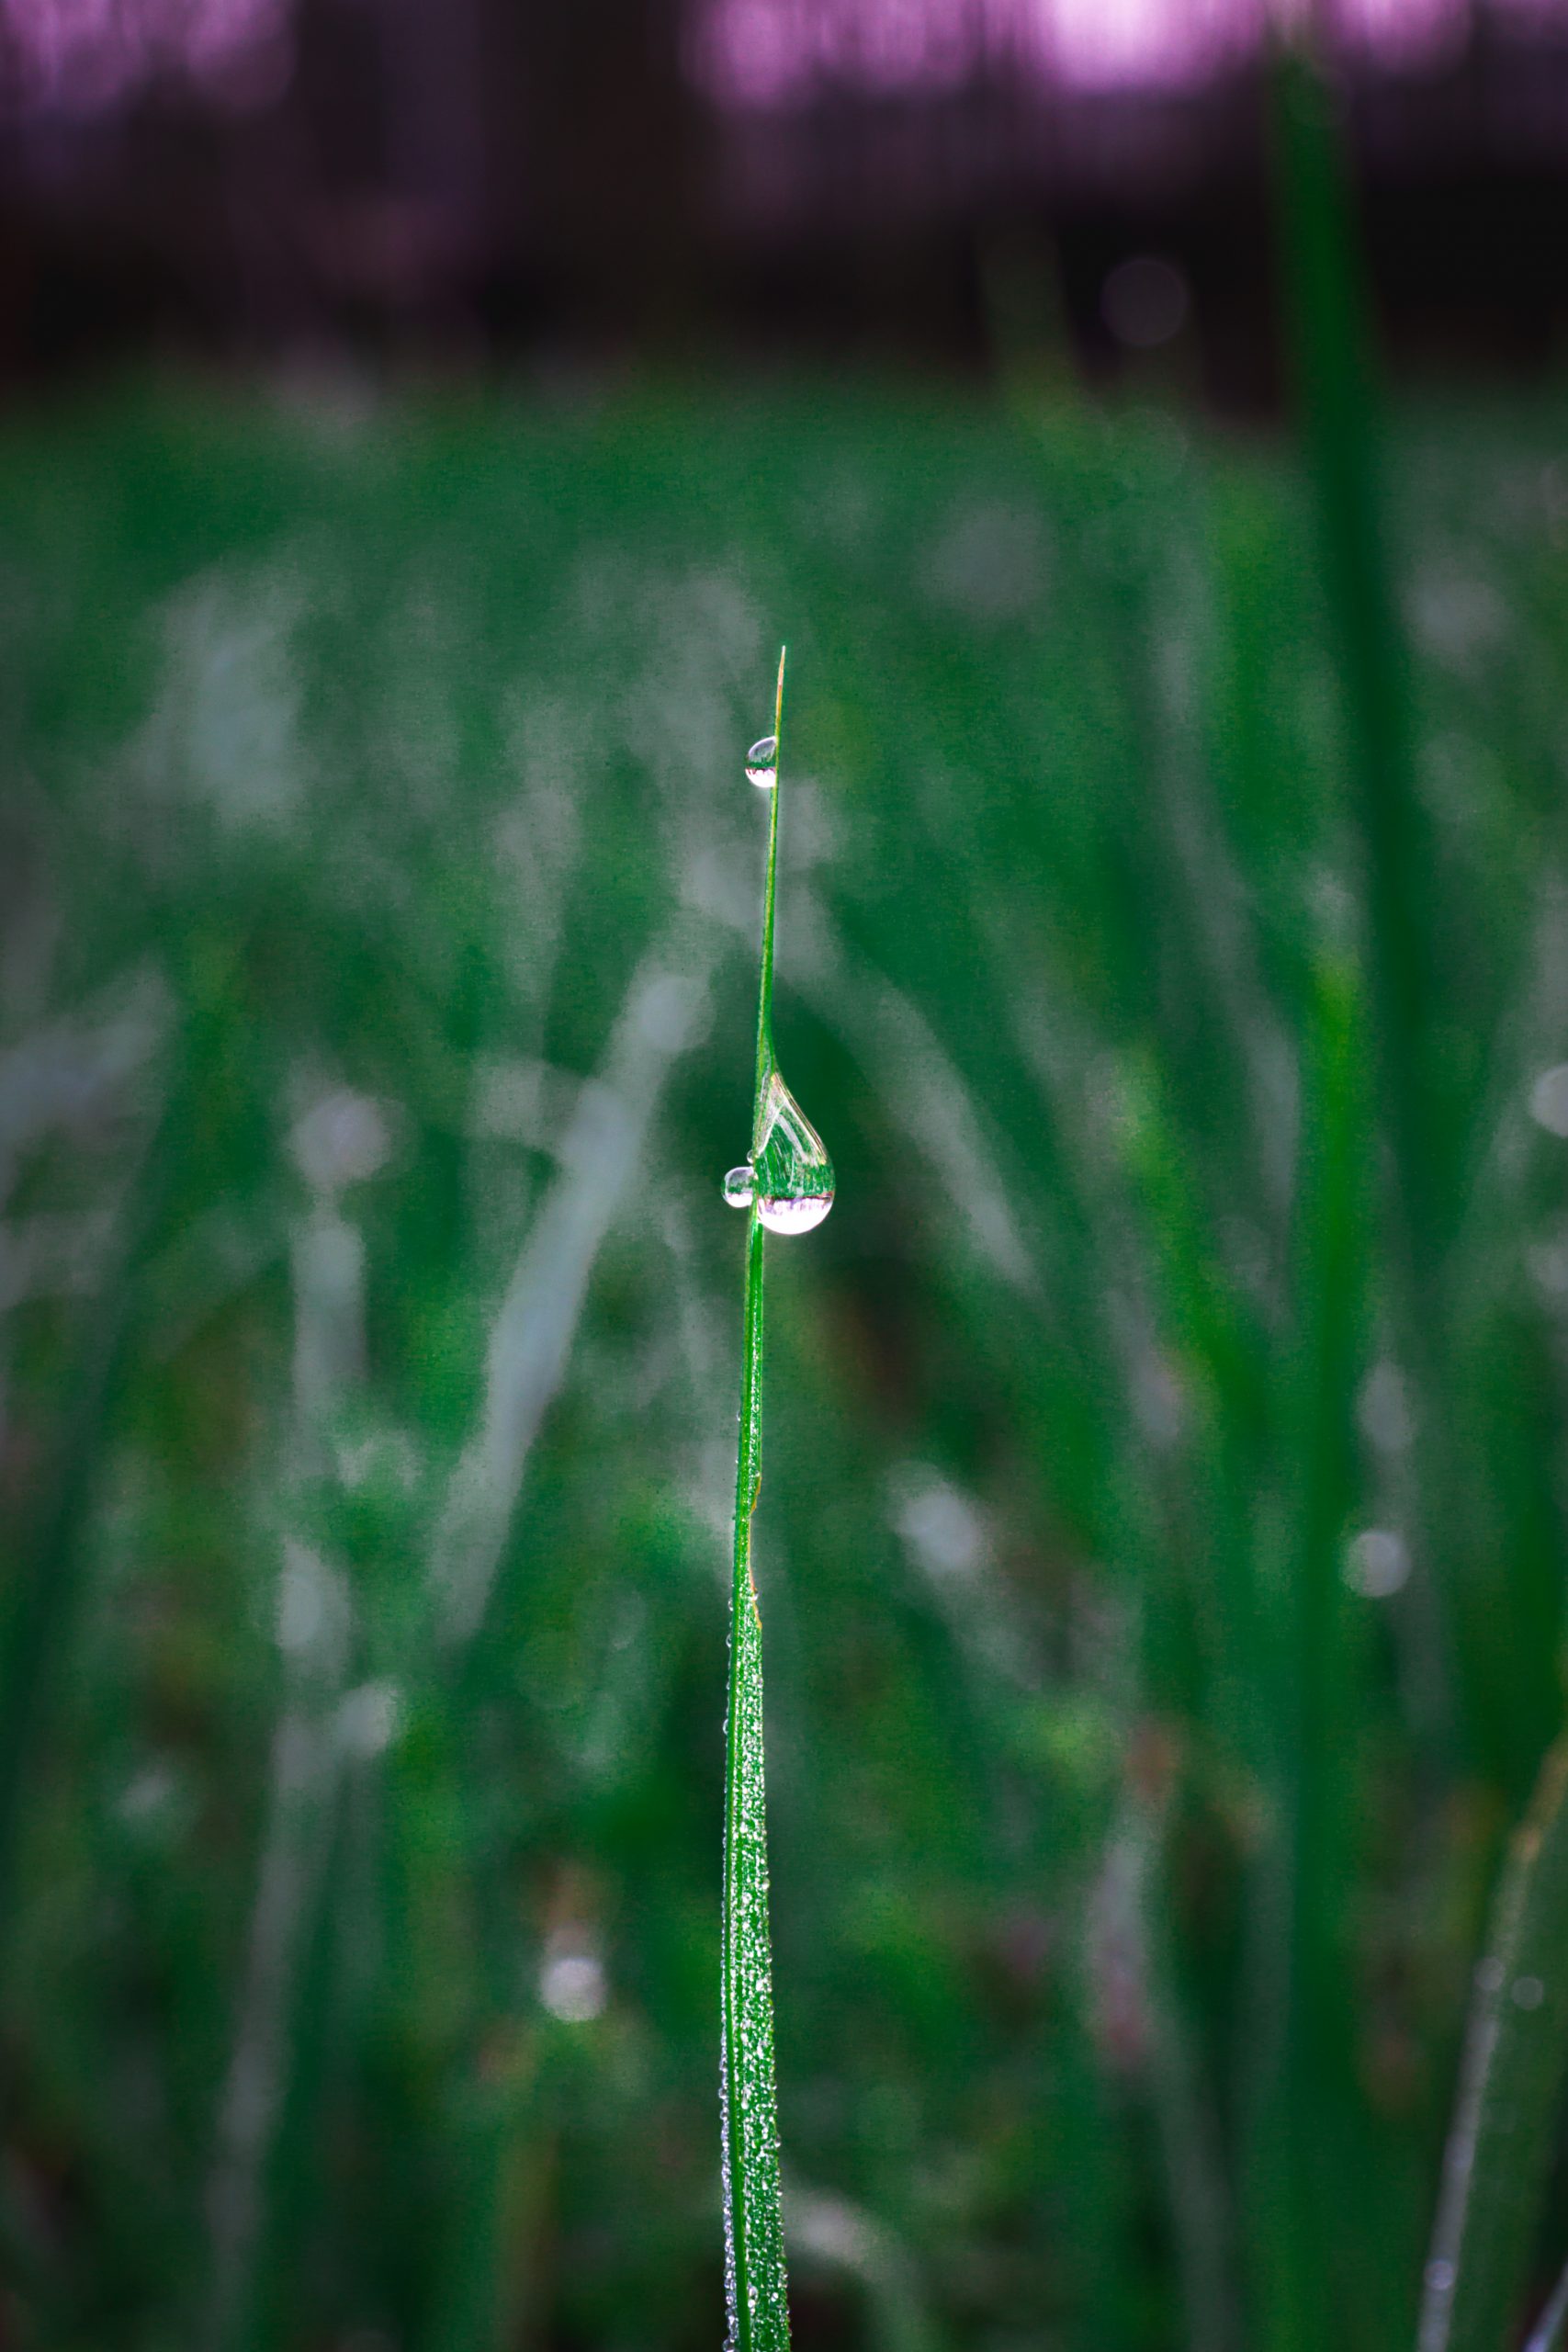 Water drops on a grass straw